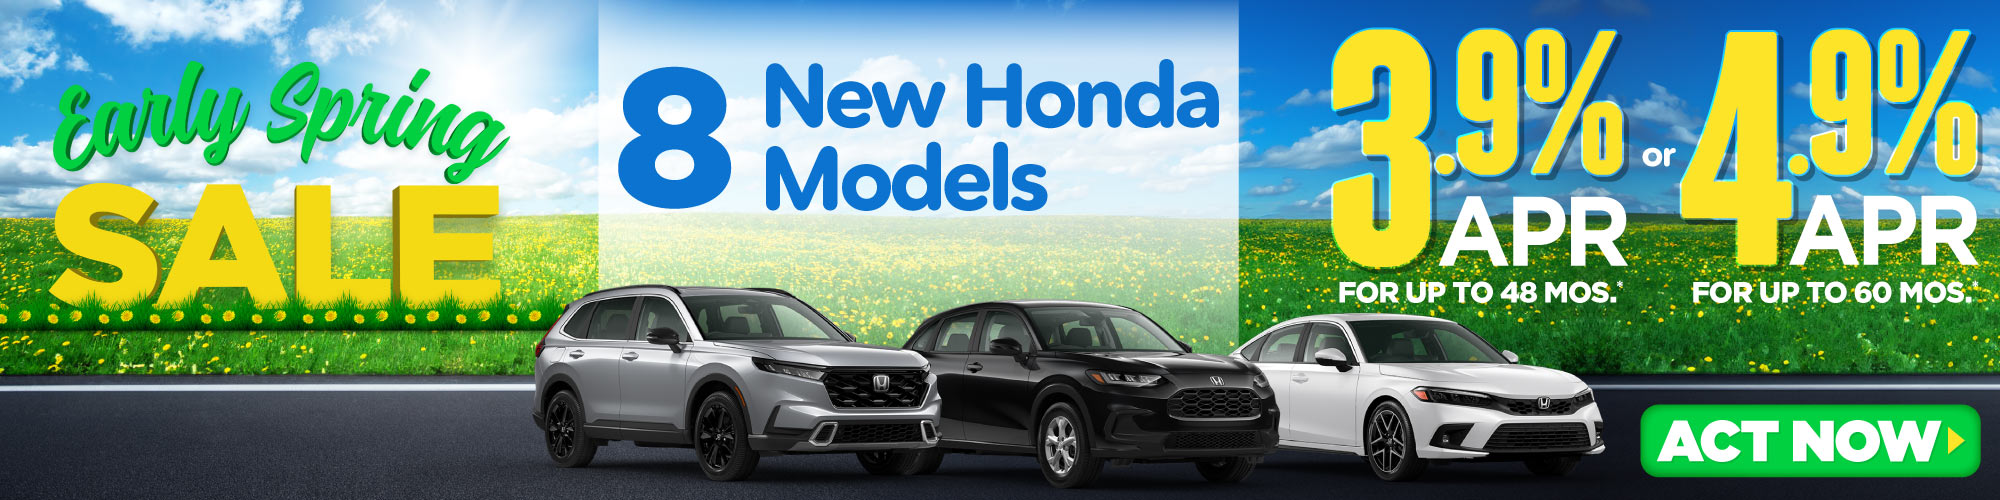 New 2022 Honda Pilot or Passport | 1.9% APR for up to 24-48 months or 2.9% APR for up to 49-60 mos or 3.9% APR for up to 61-72 mos. | Act Now